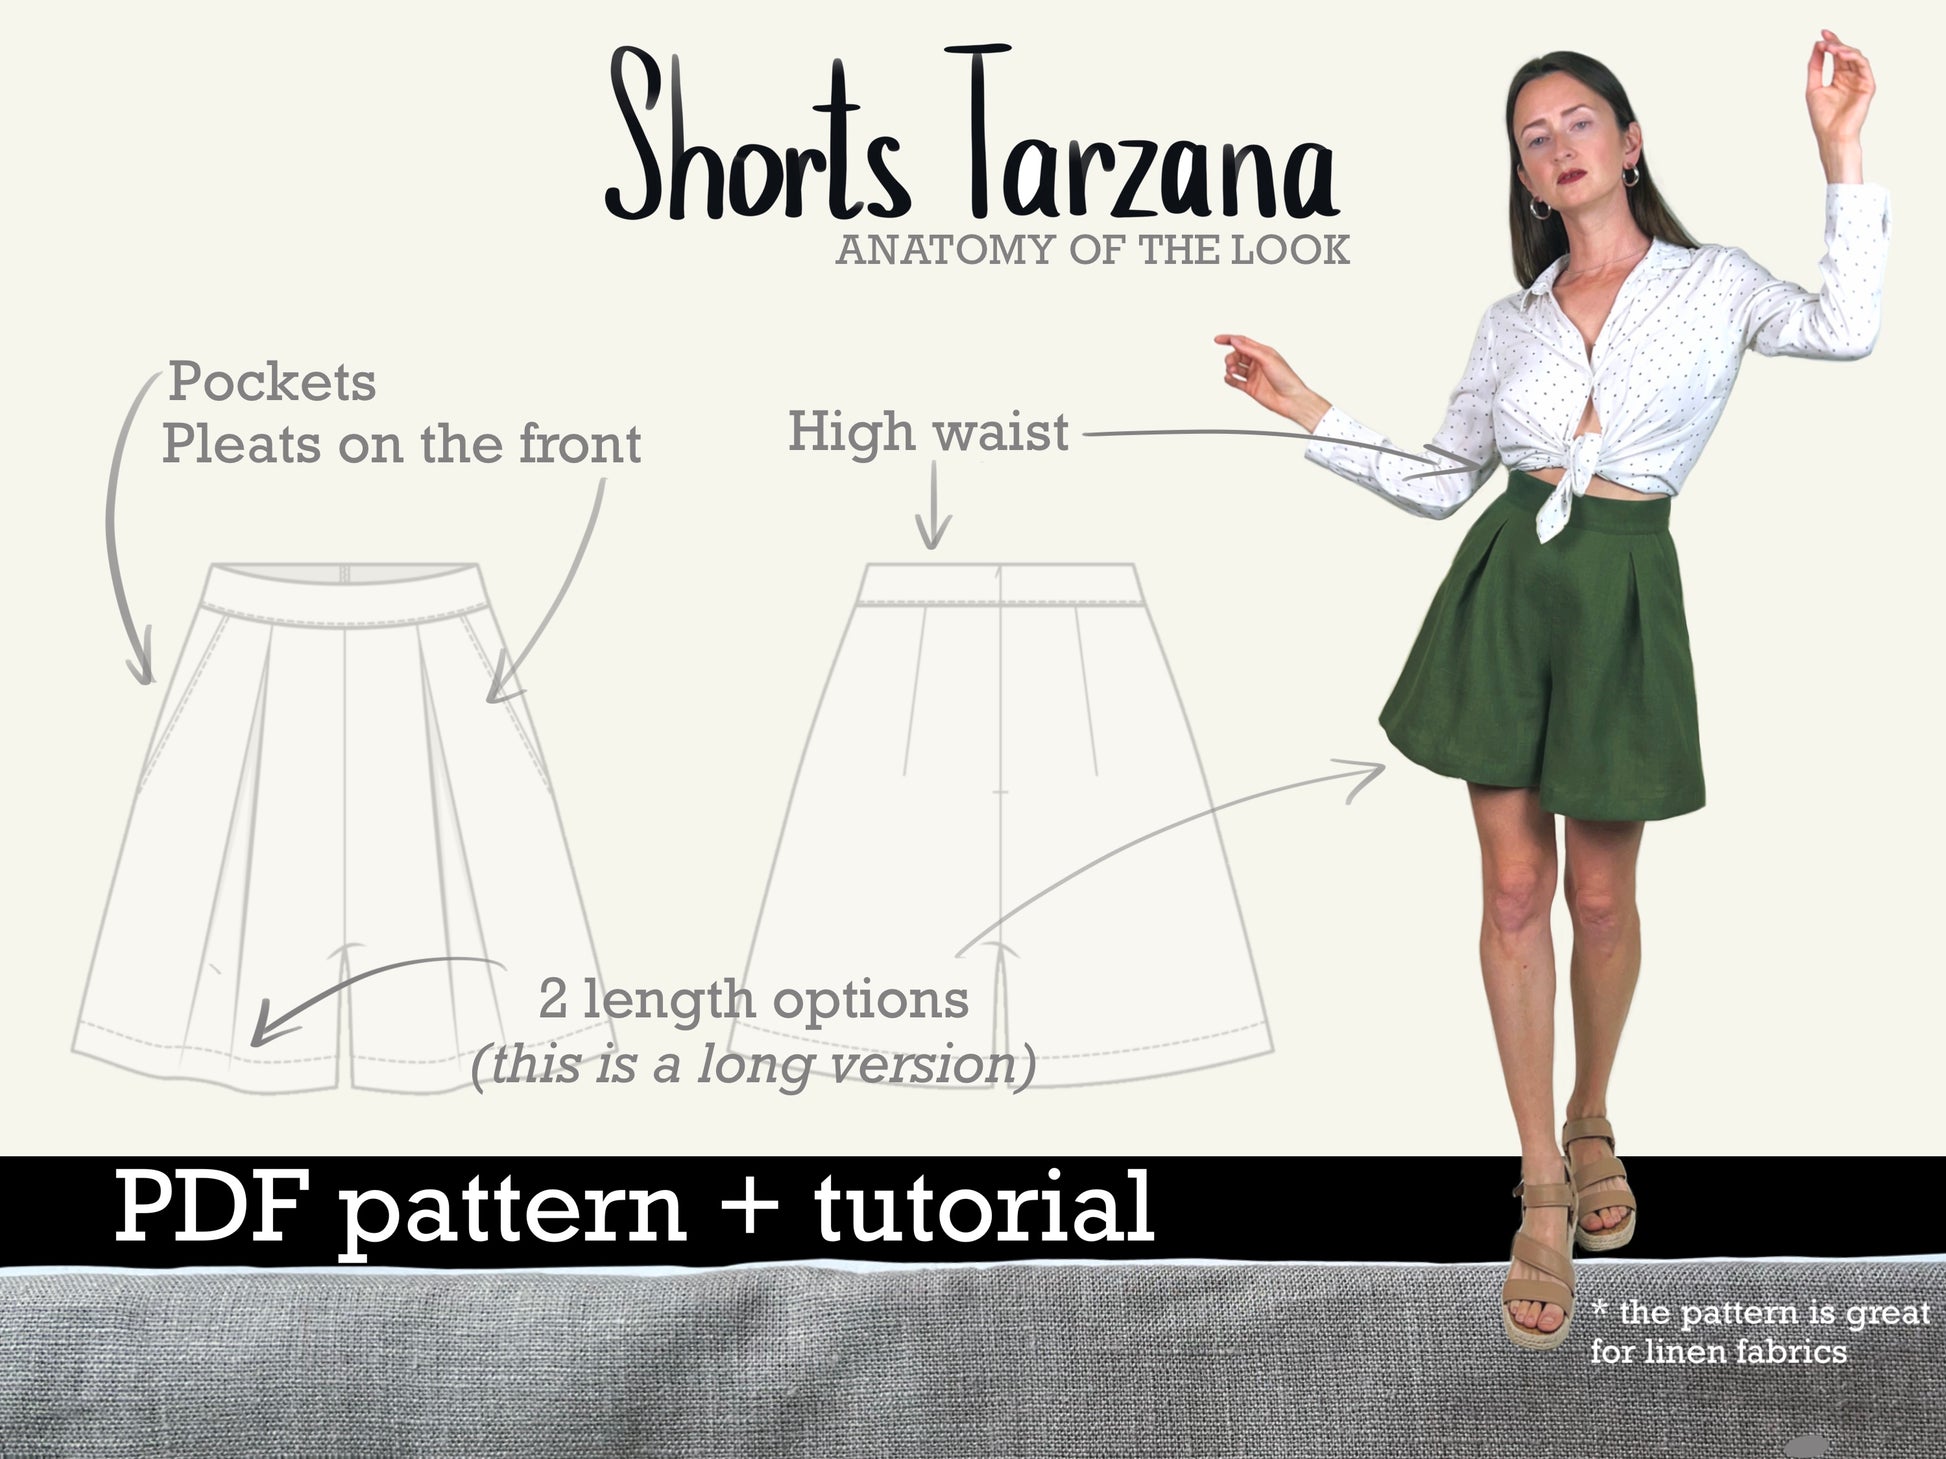 The Anatomy of a Sewing Pattern